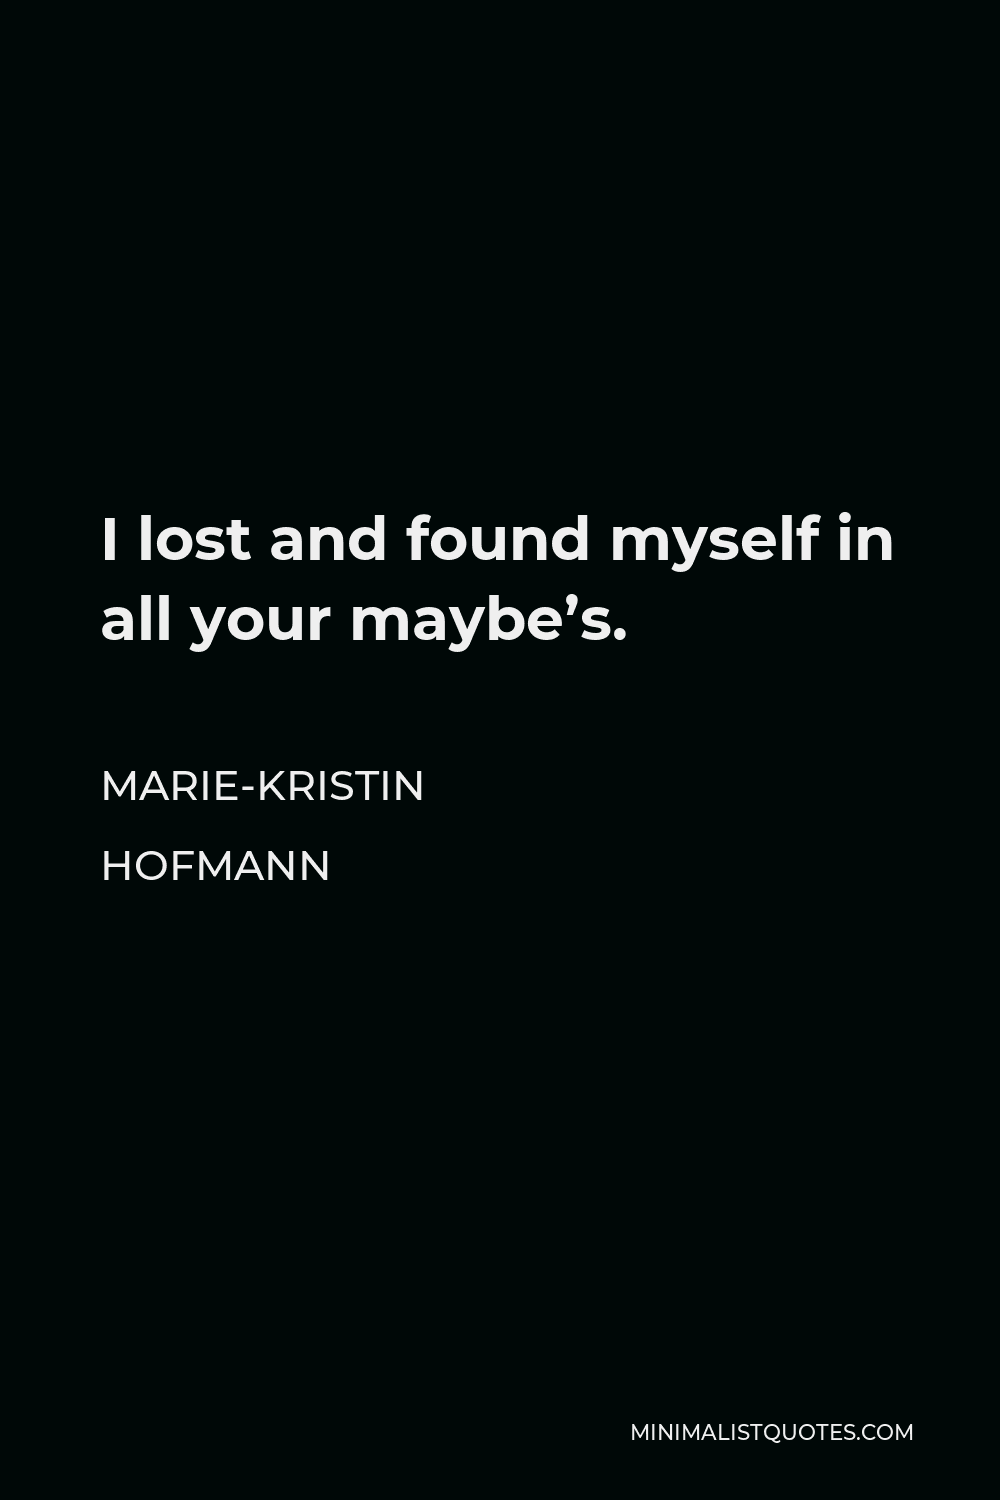 Marie-Kristin Hofmann Quote - I lost and found myself in all your maybe’s.